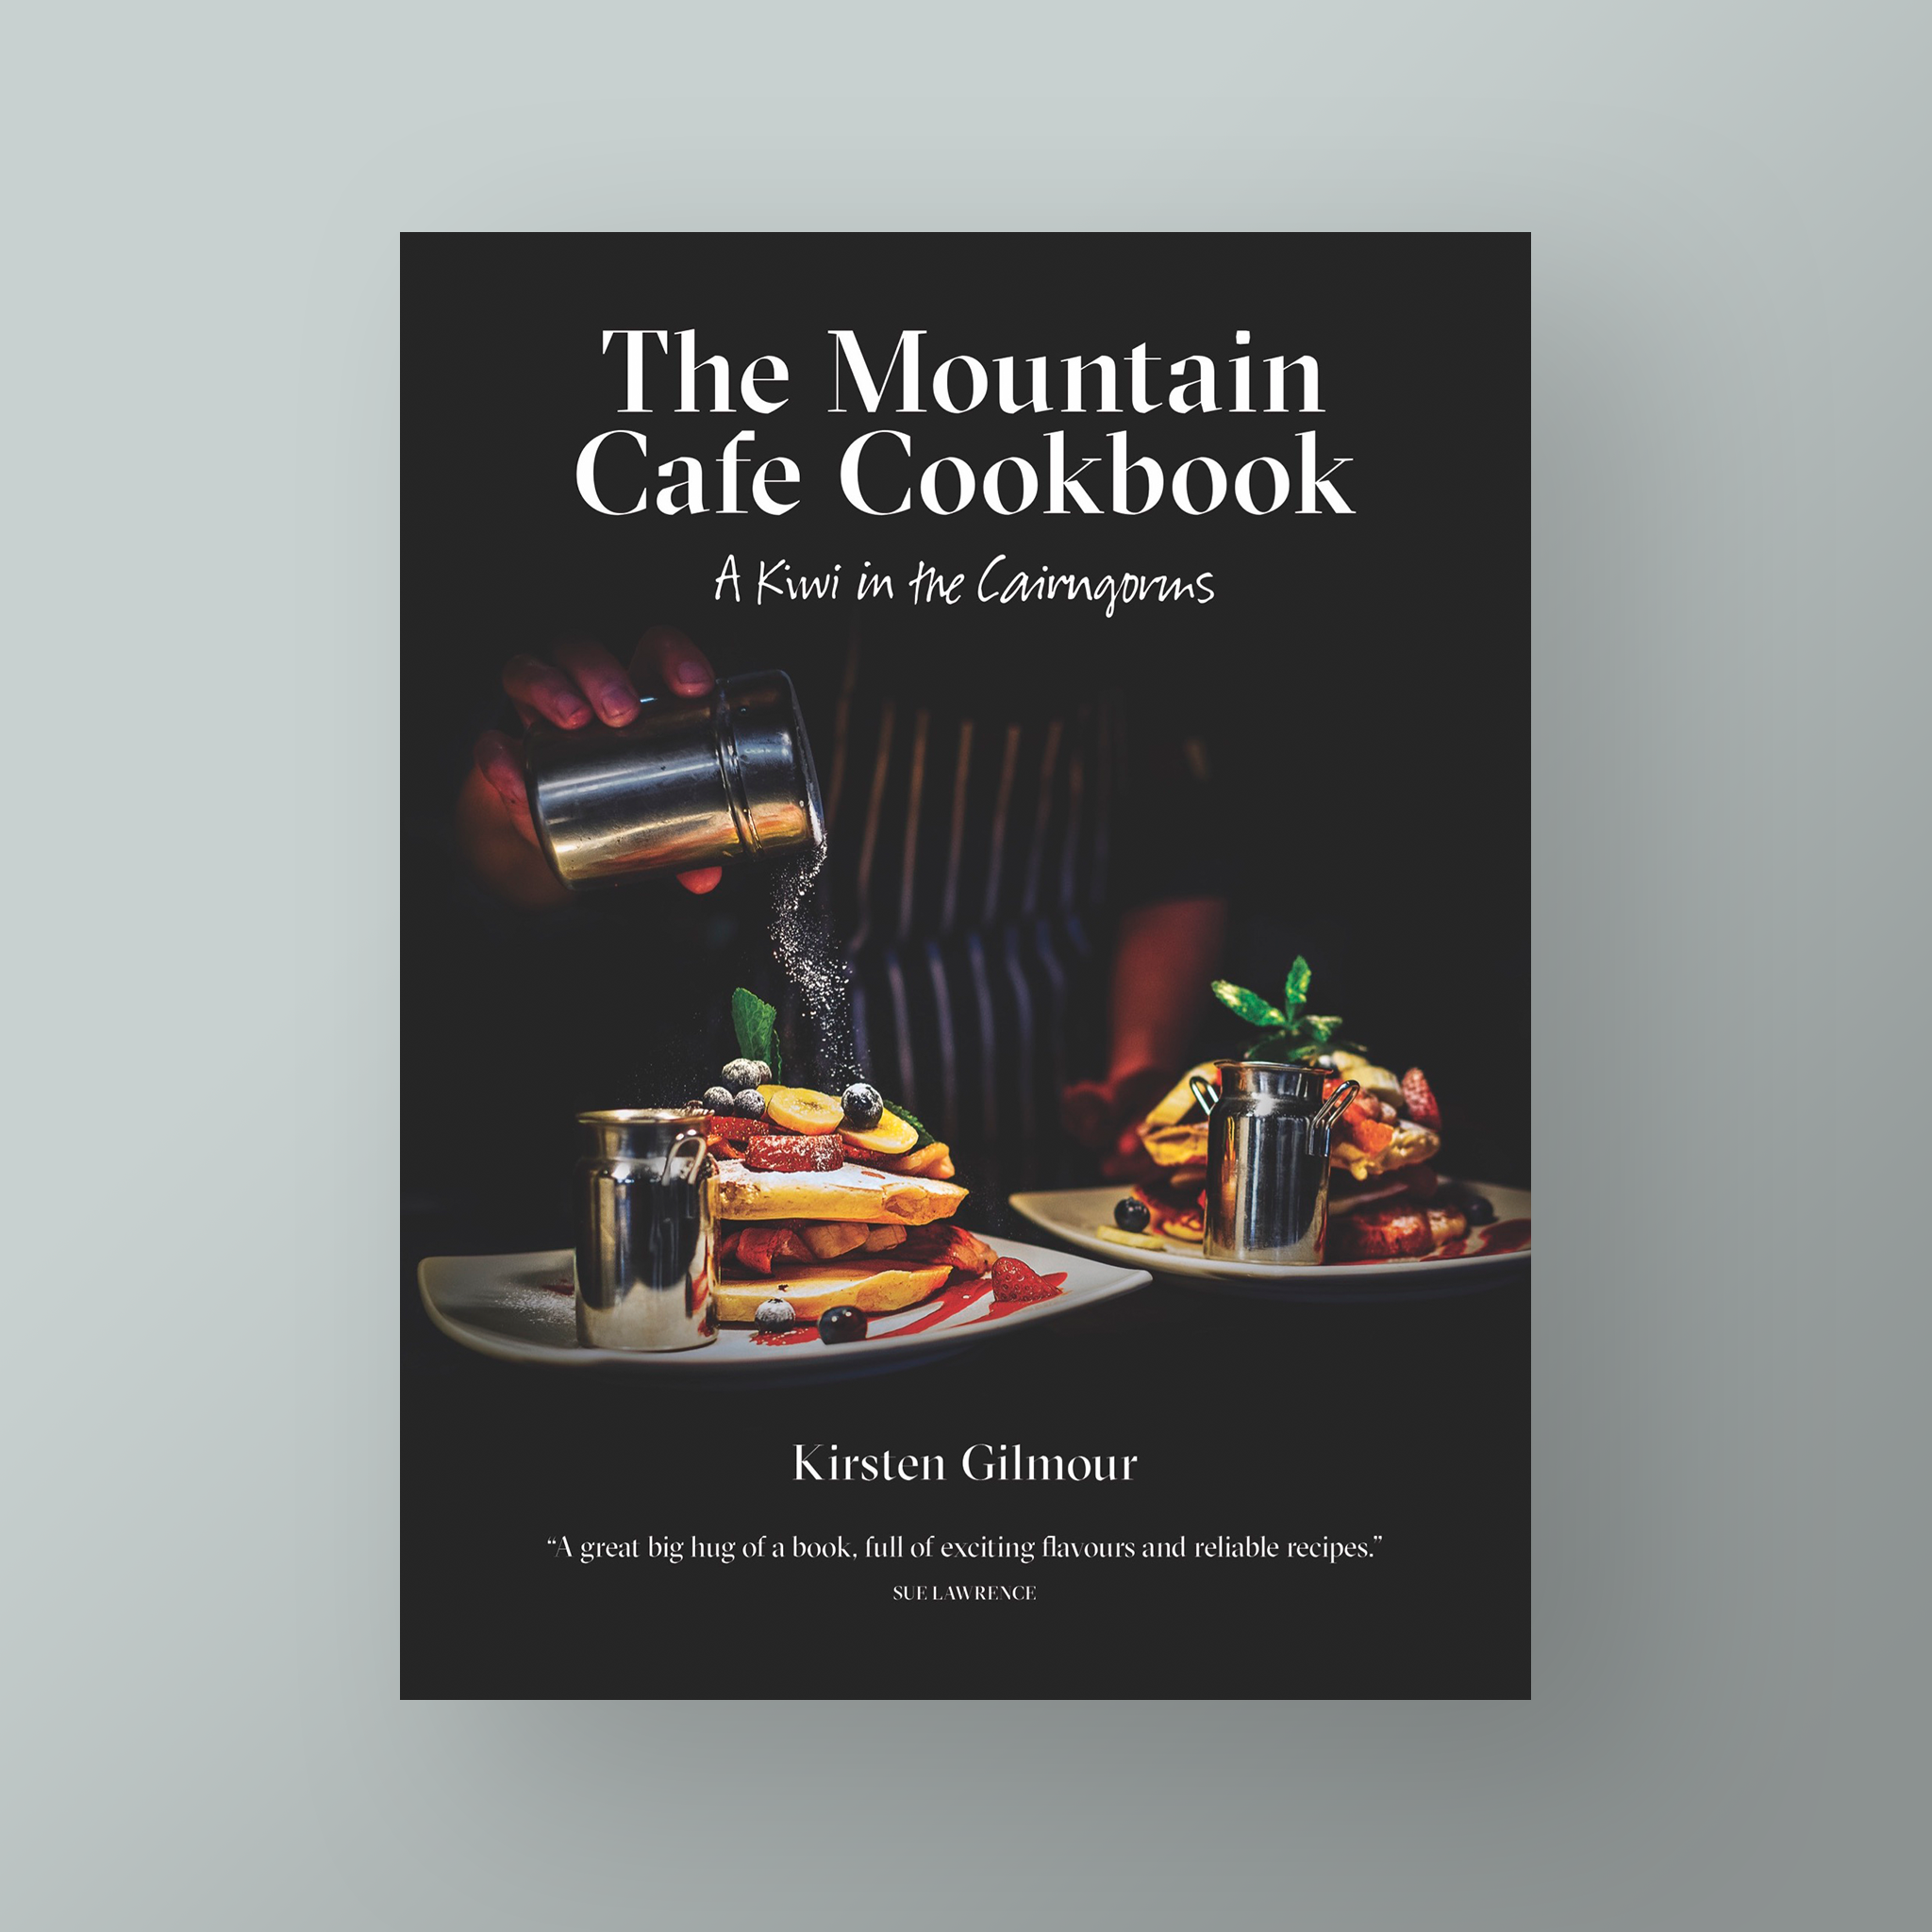 The Mountain Cafe Cookbook